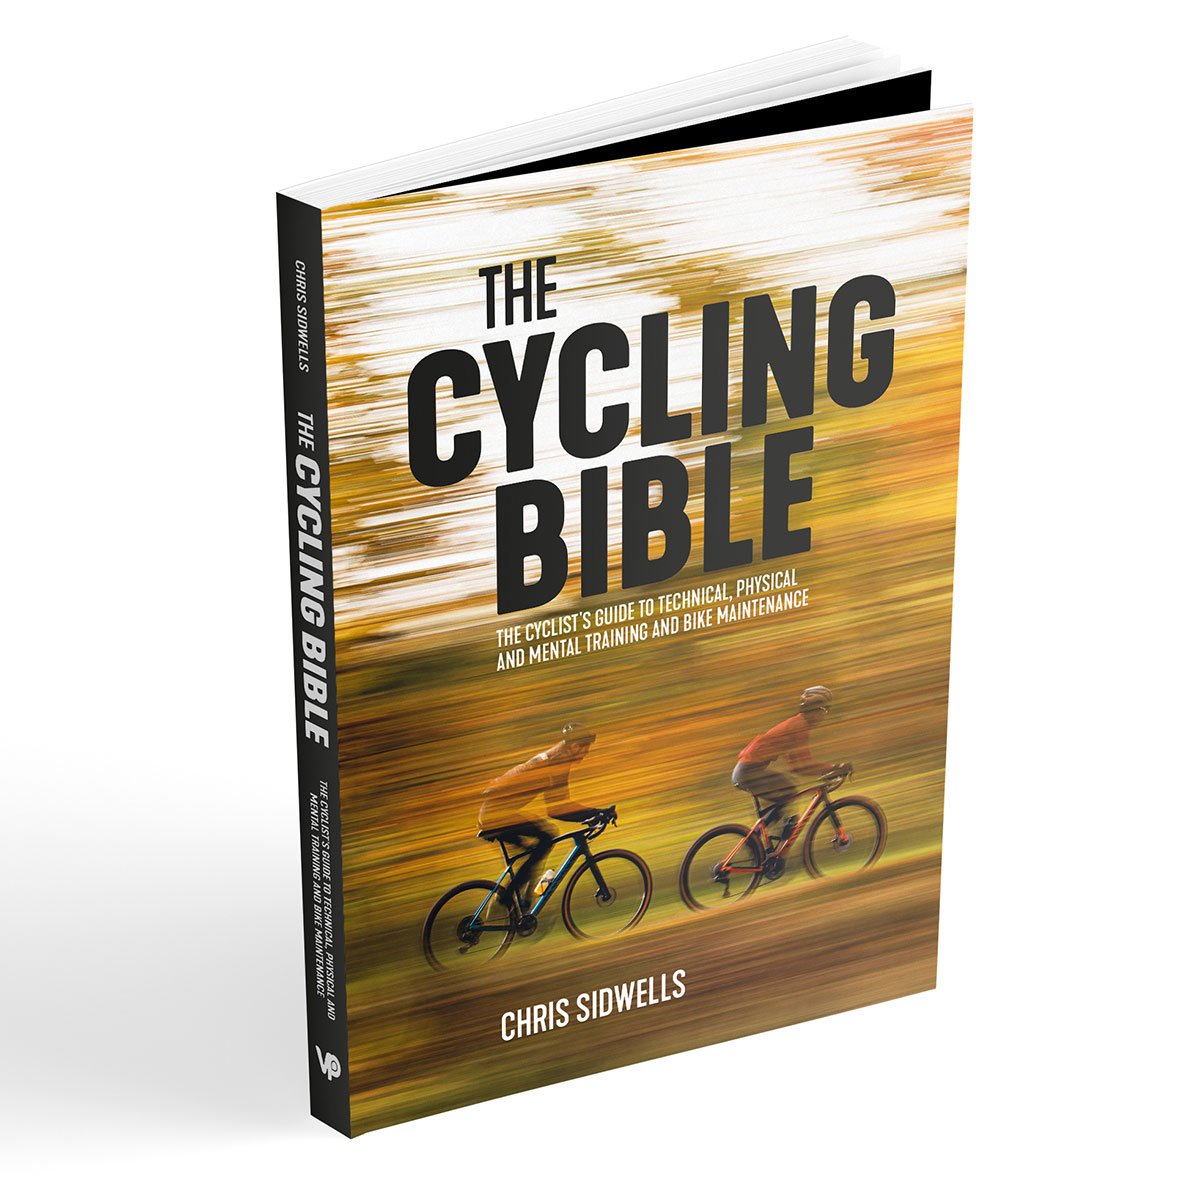 The cycling bible by chris sidewell